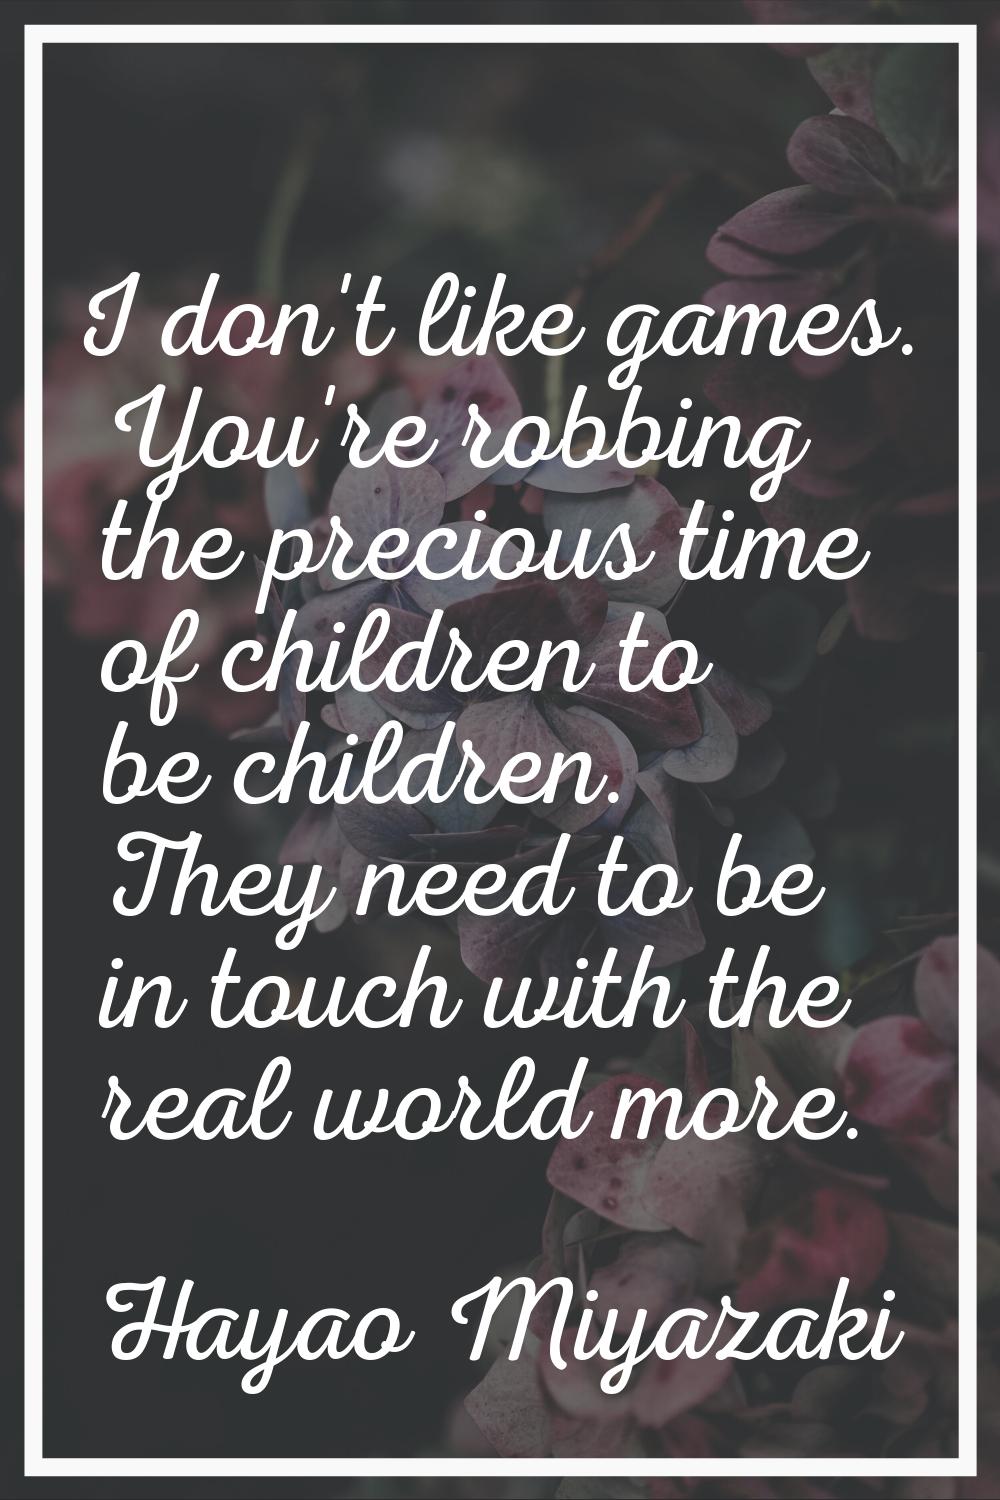 I don't like games. You're robbing the precious time of children to be children. They need to be in